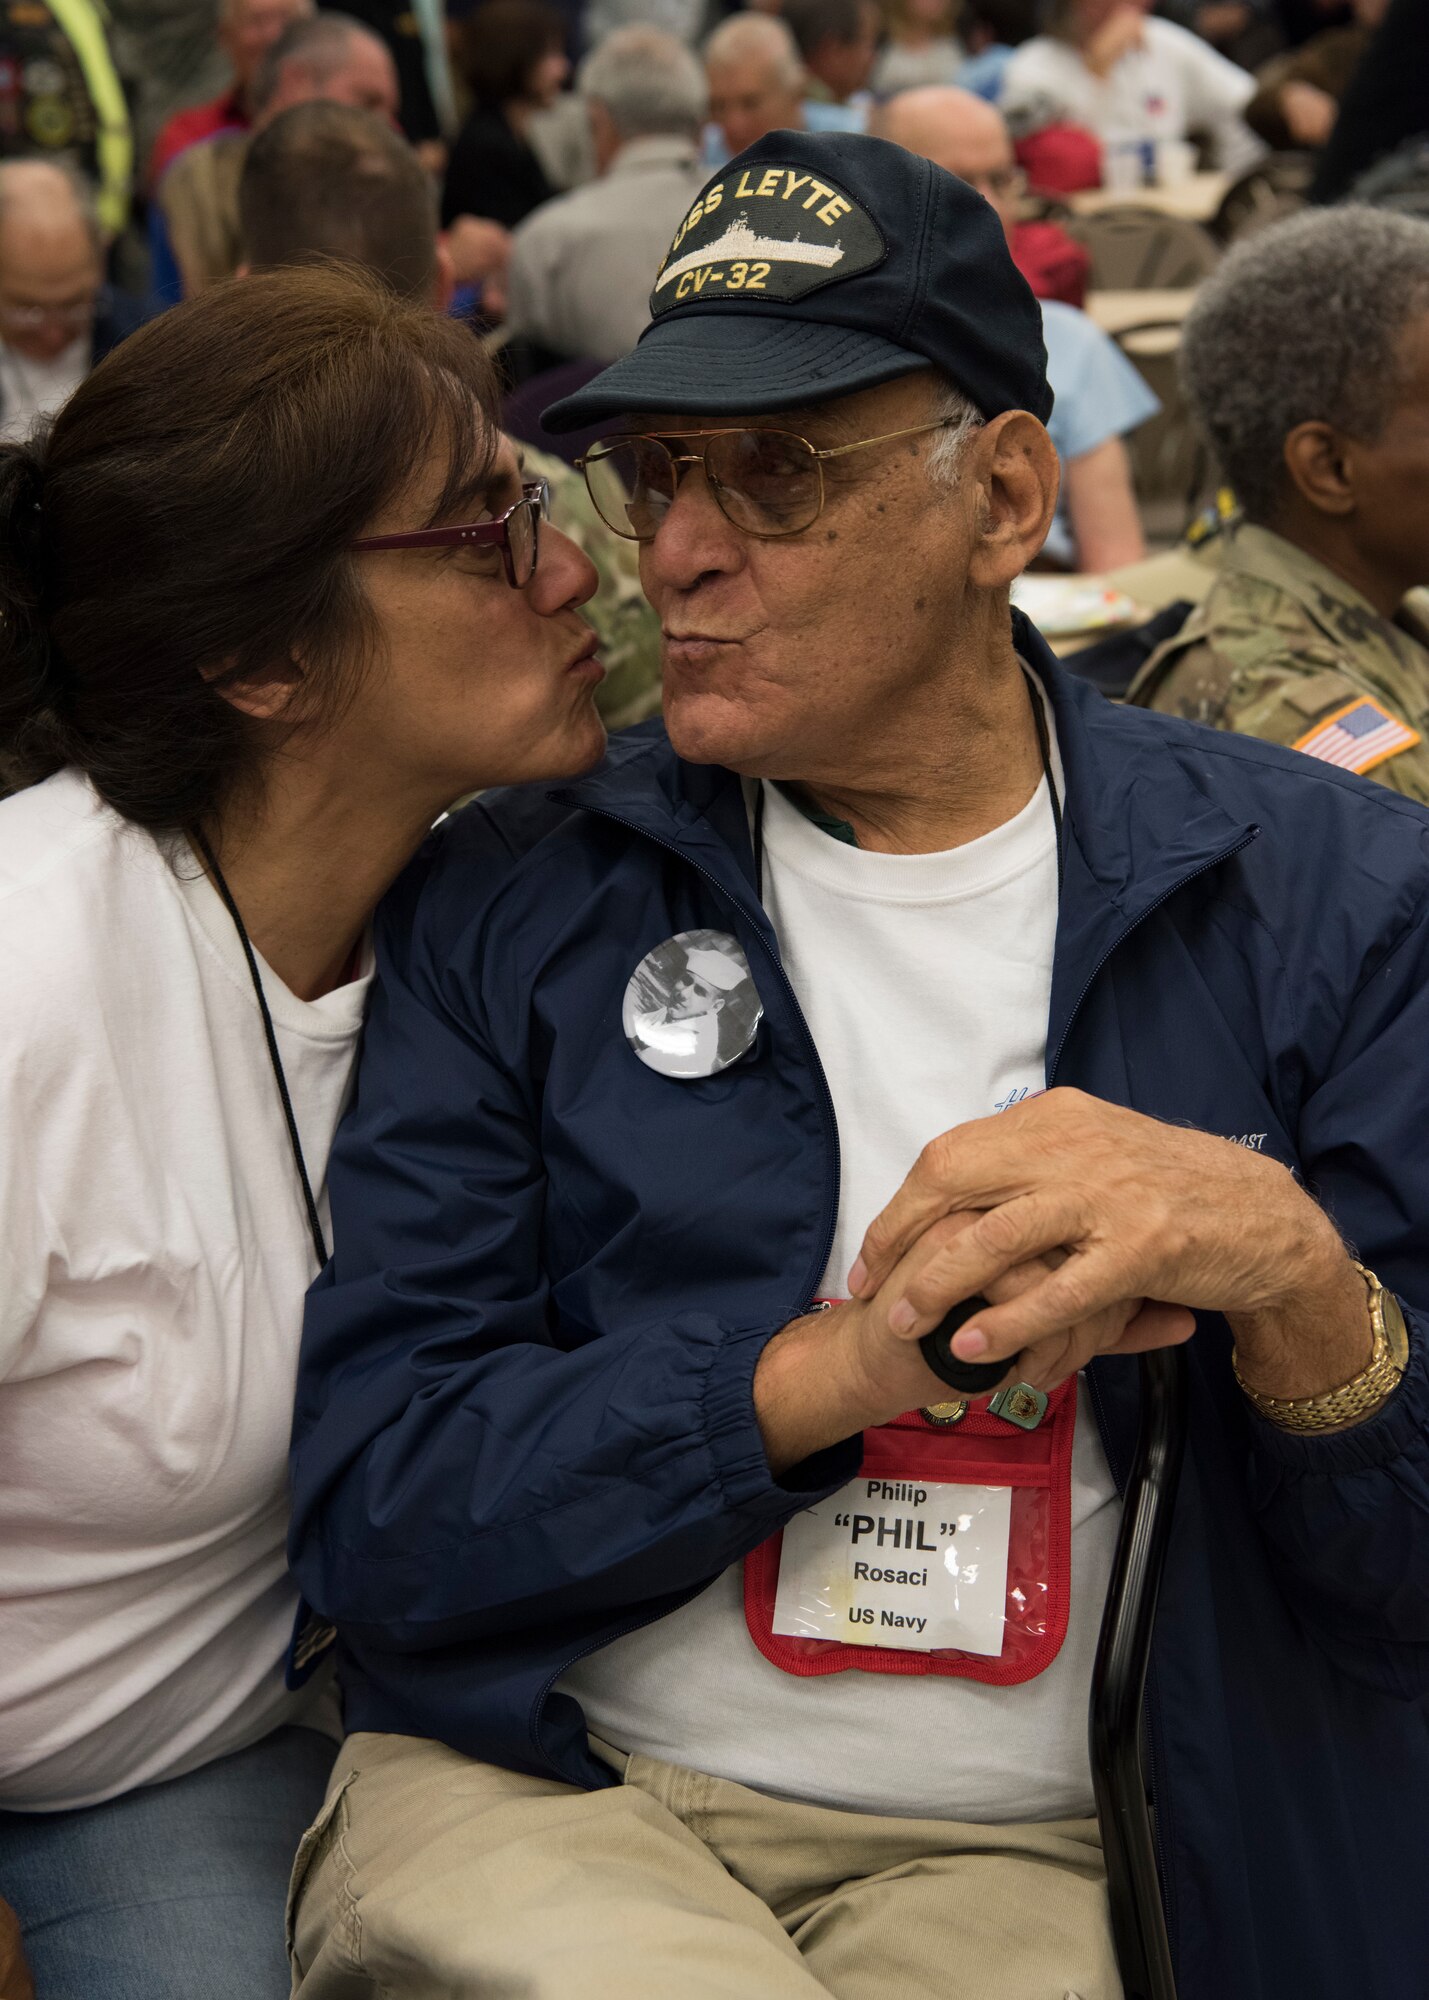 Phillip "Phil" Rosaci, United States Navy veteran, celebrates during the Honor Flight ceremony, March 17, 2018 at Wickham Park Senior Center in Melbourne, Fla. Rosaci served as a Deck Hand on the USS Leyte and turns 87 years old this March.